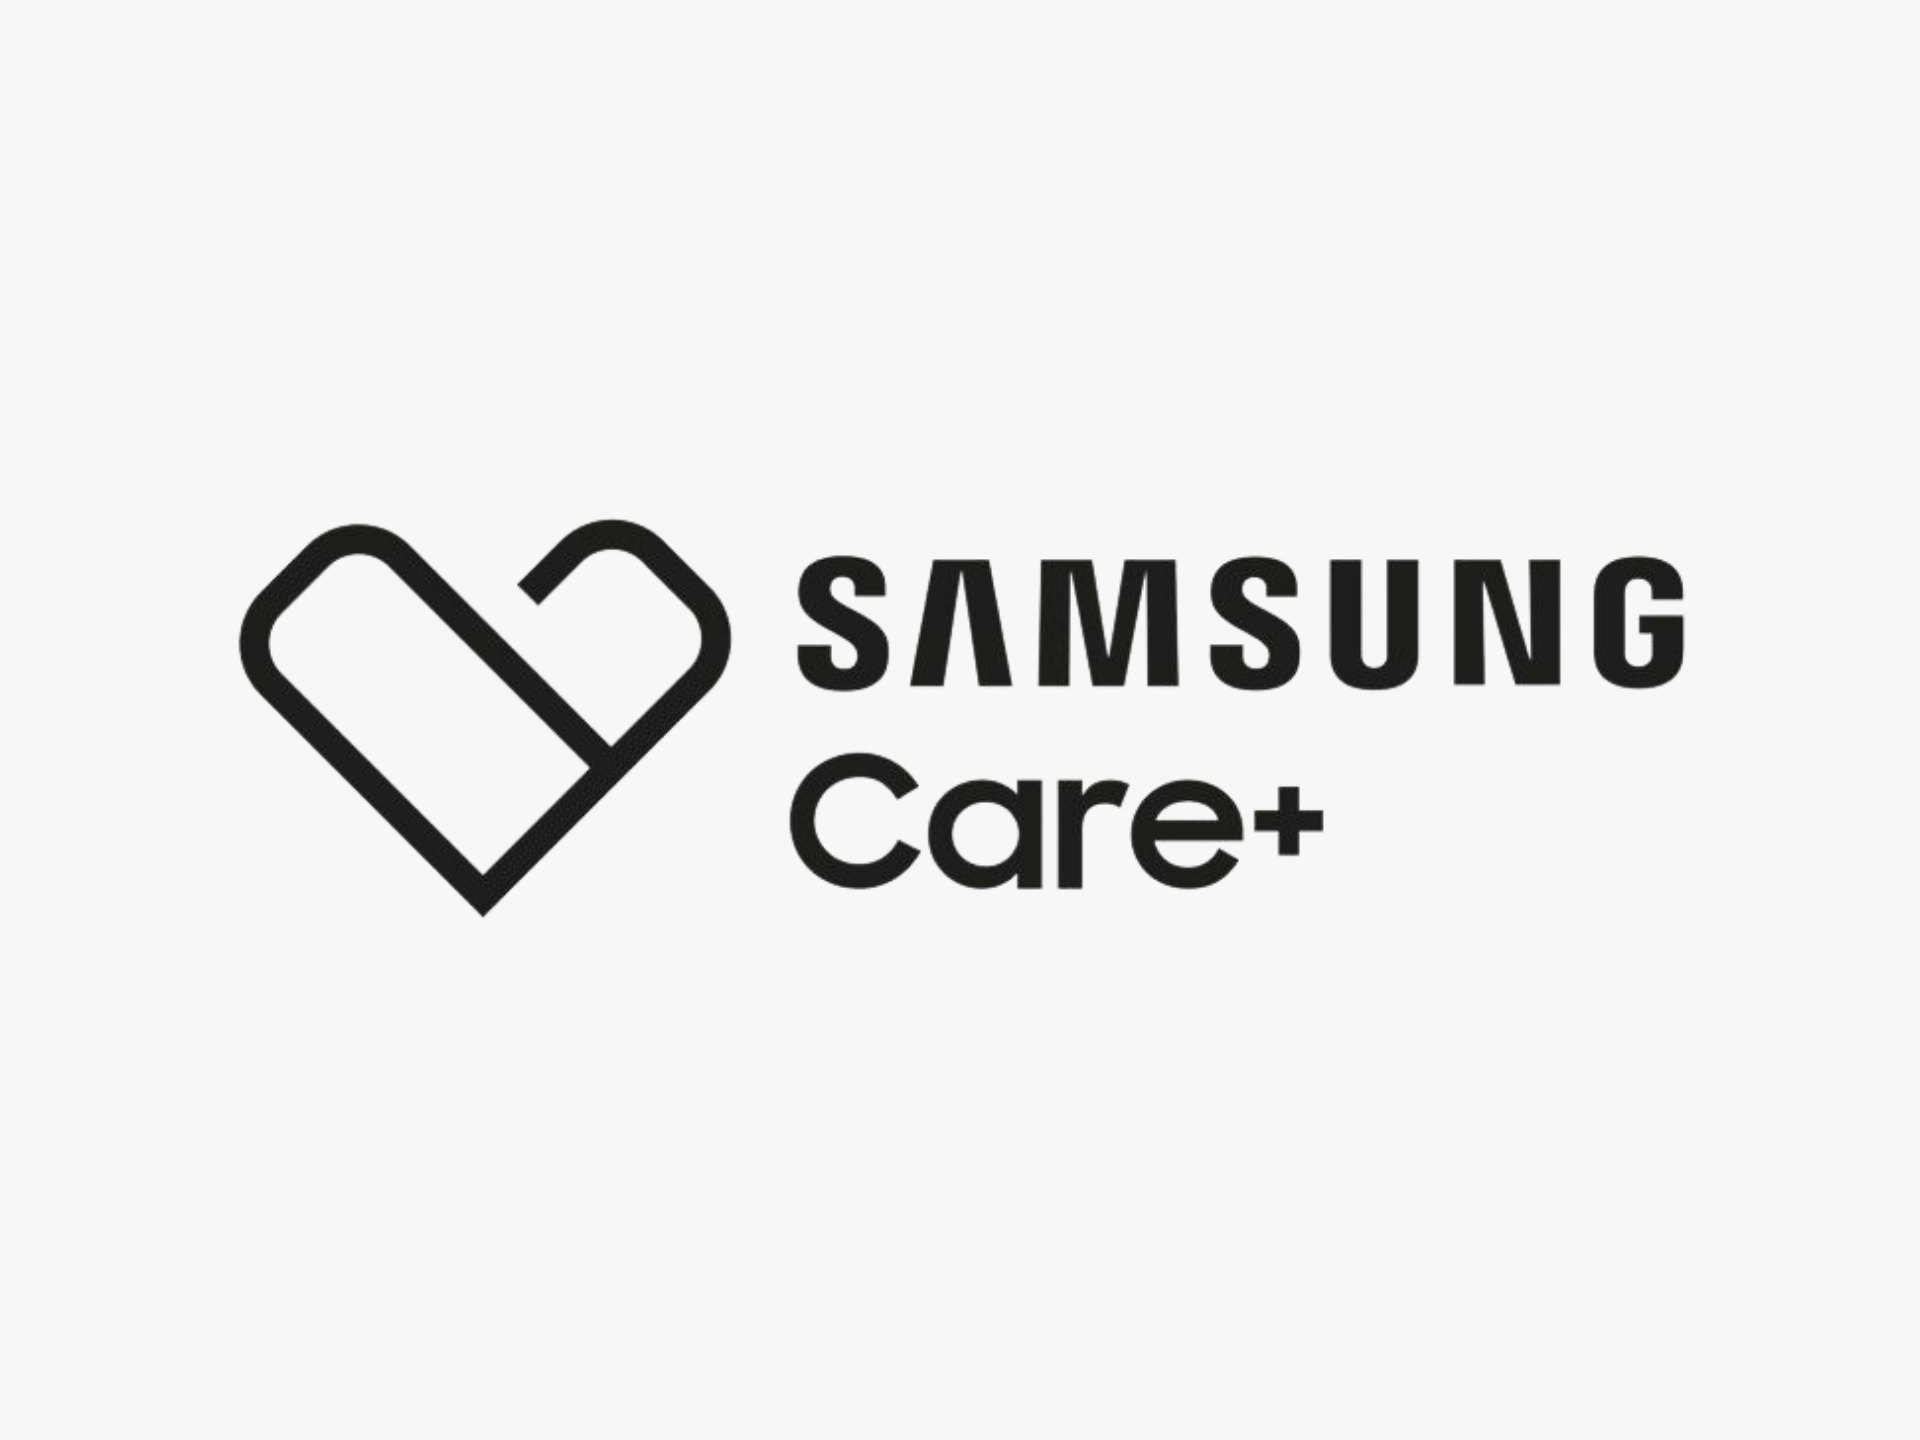 what-is-samsung-care+-and-how-does-it-work?